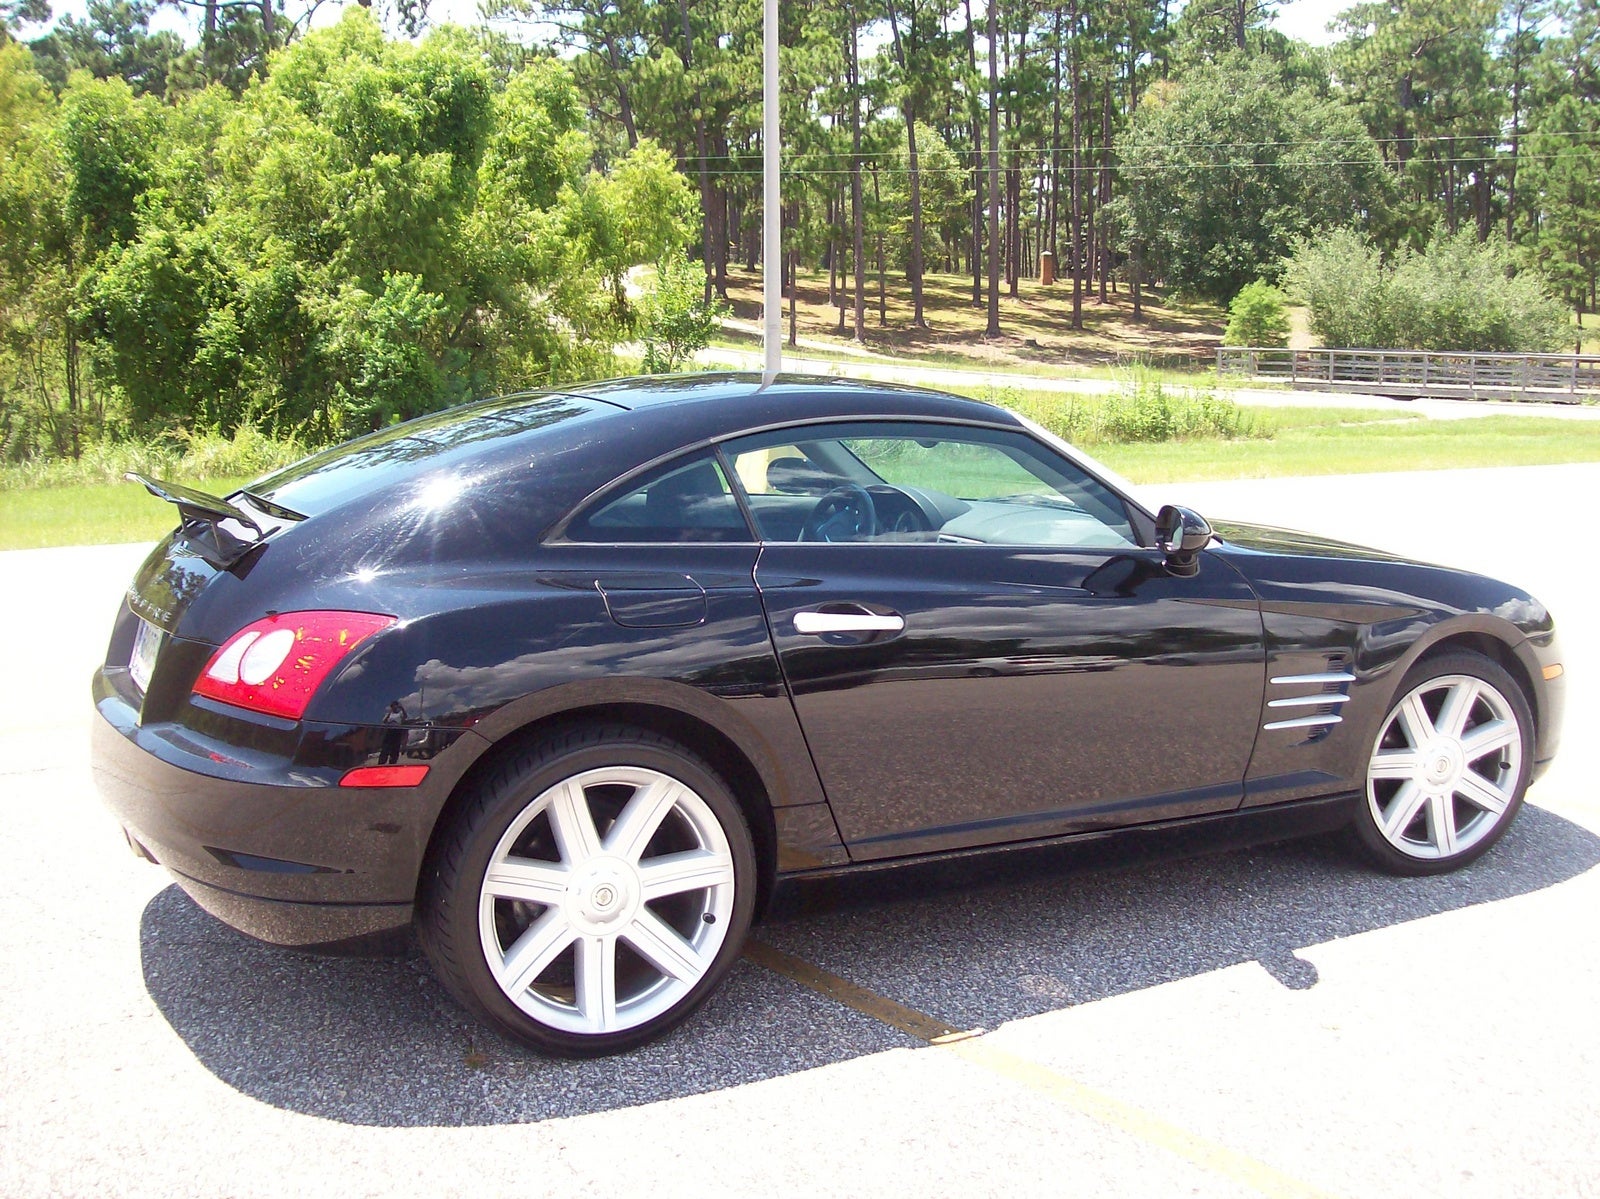 2004 Chrysler crossfire review car and driver #1